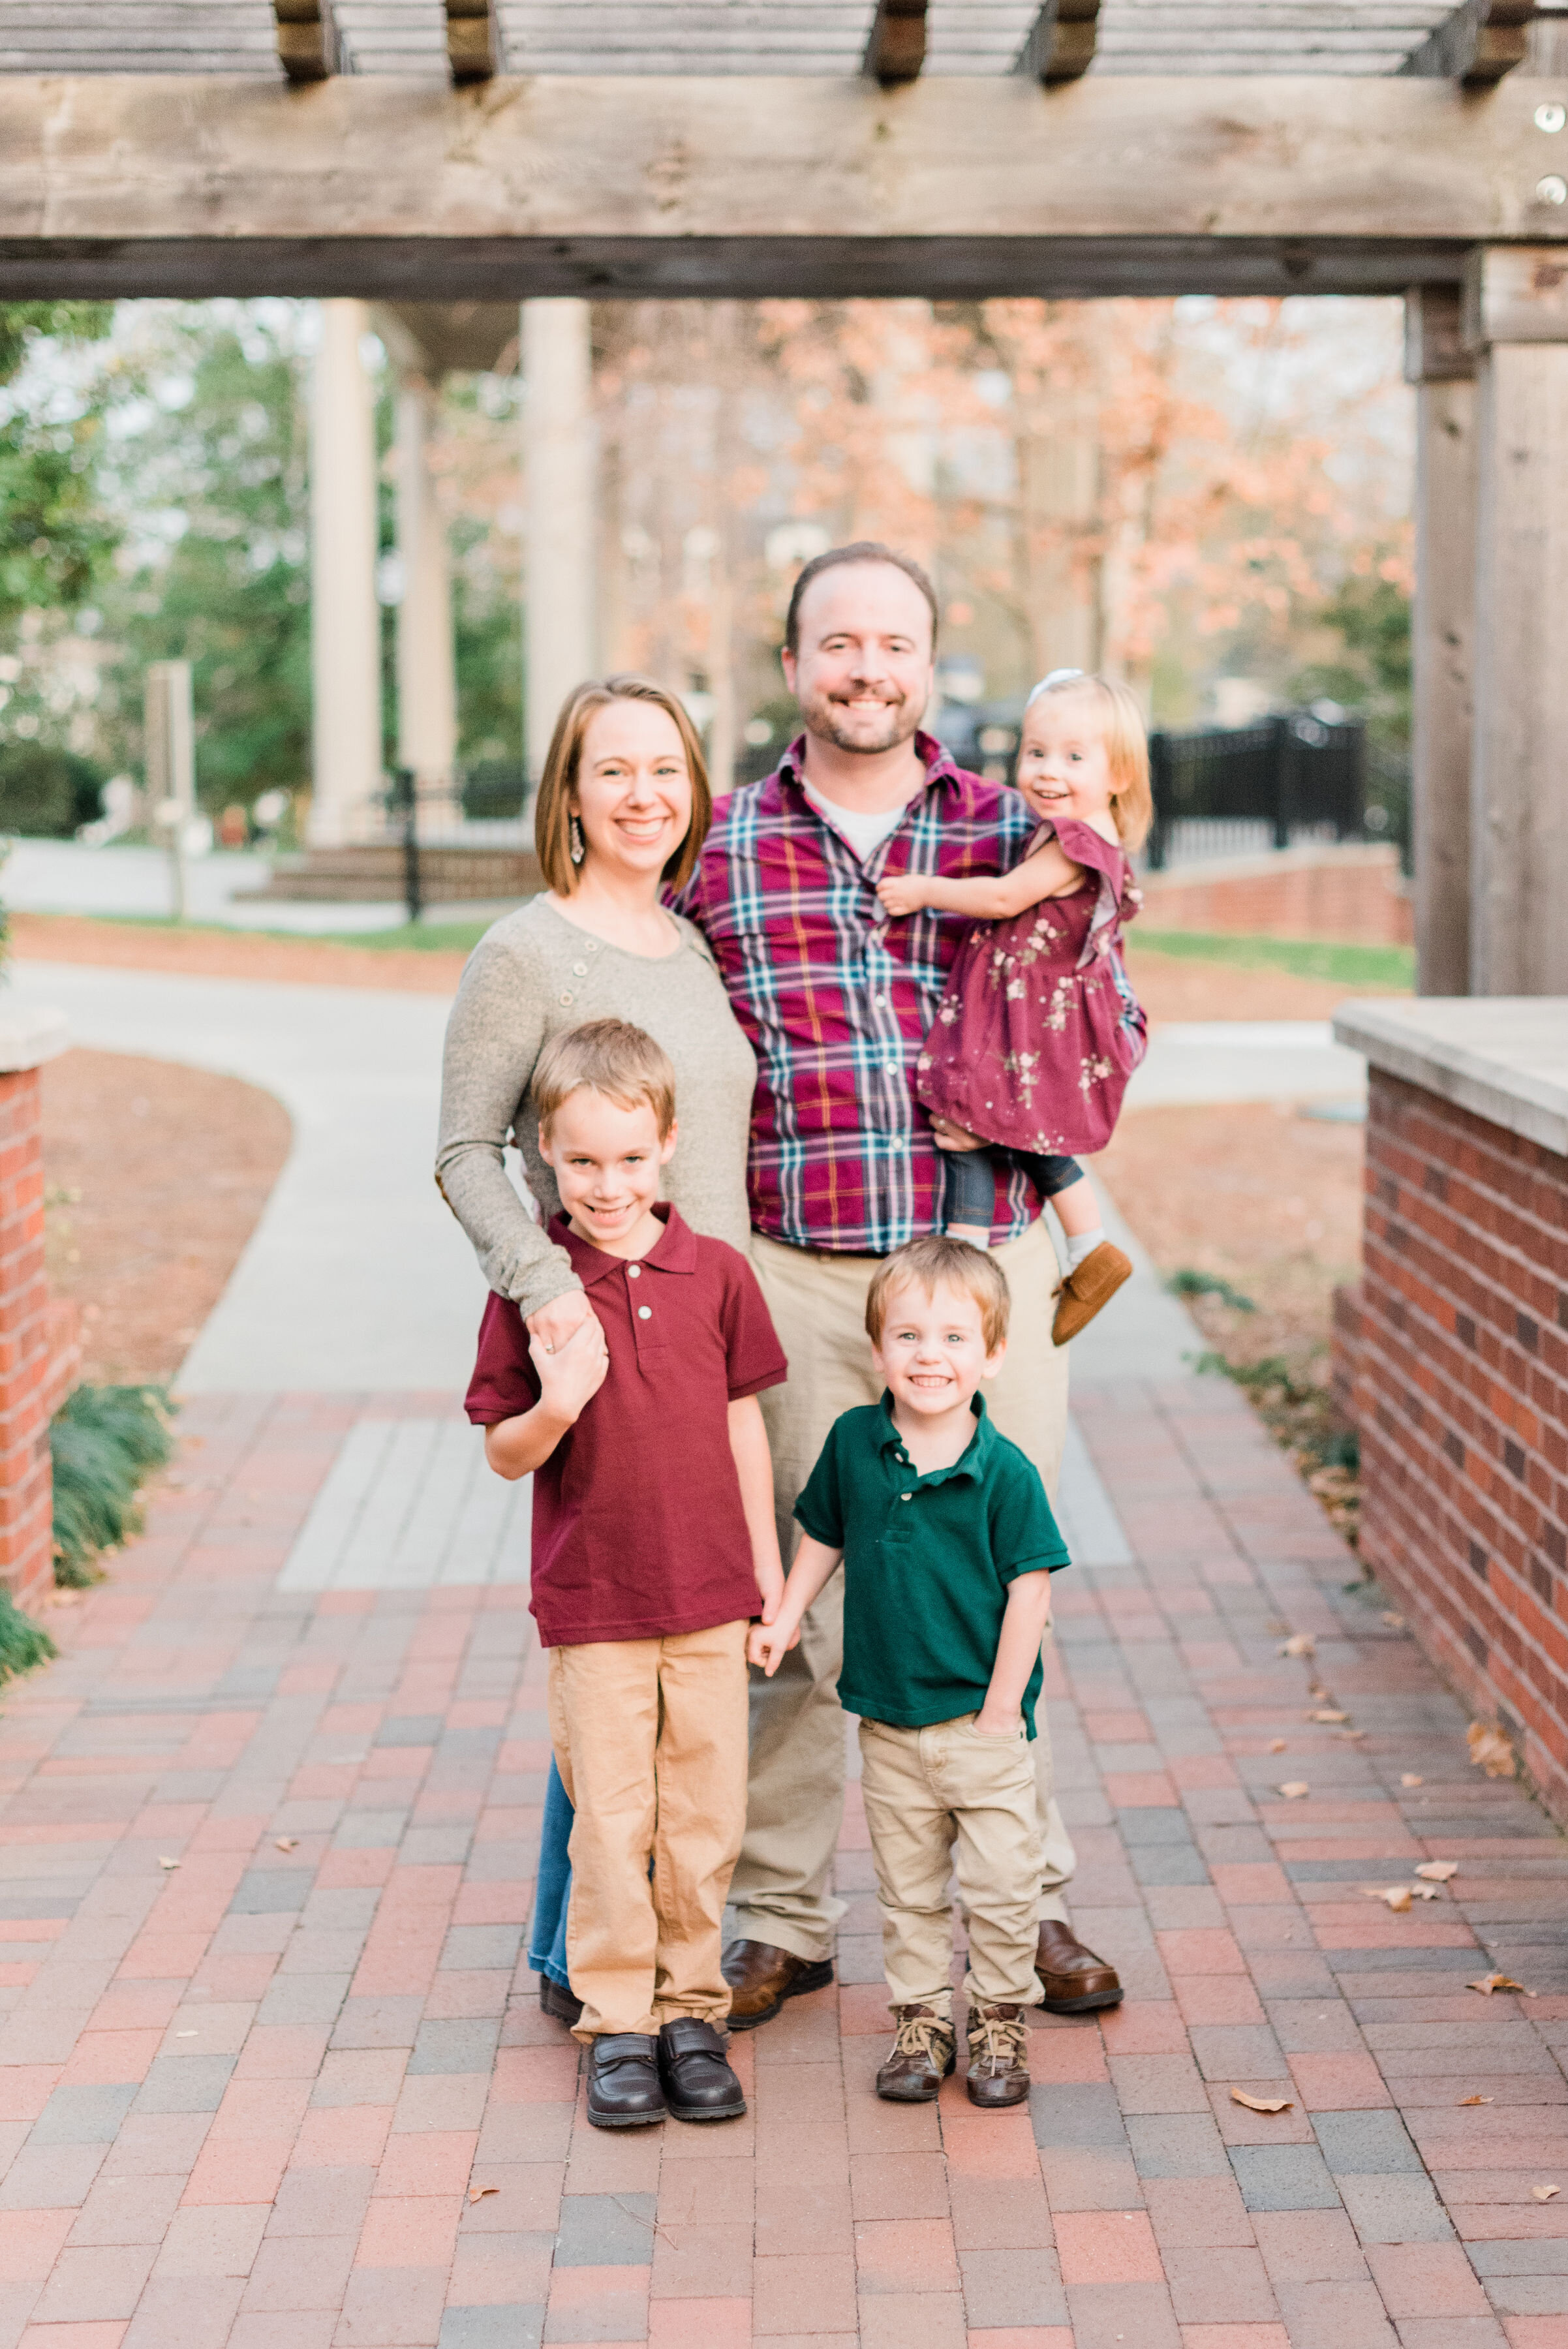 Laid back family of 5 | Family photos in Charlotte